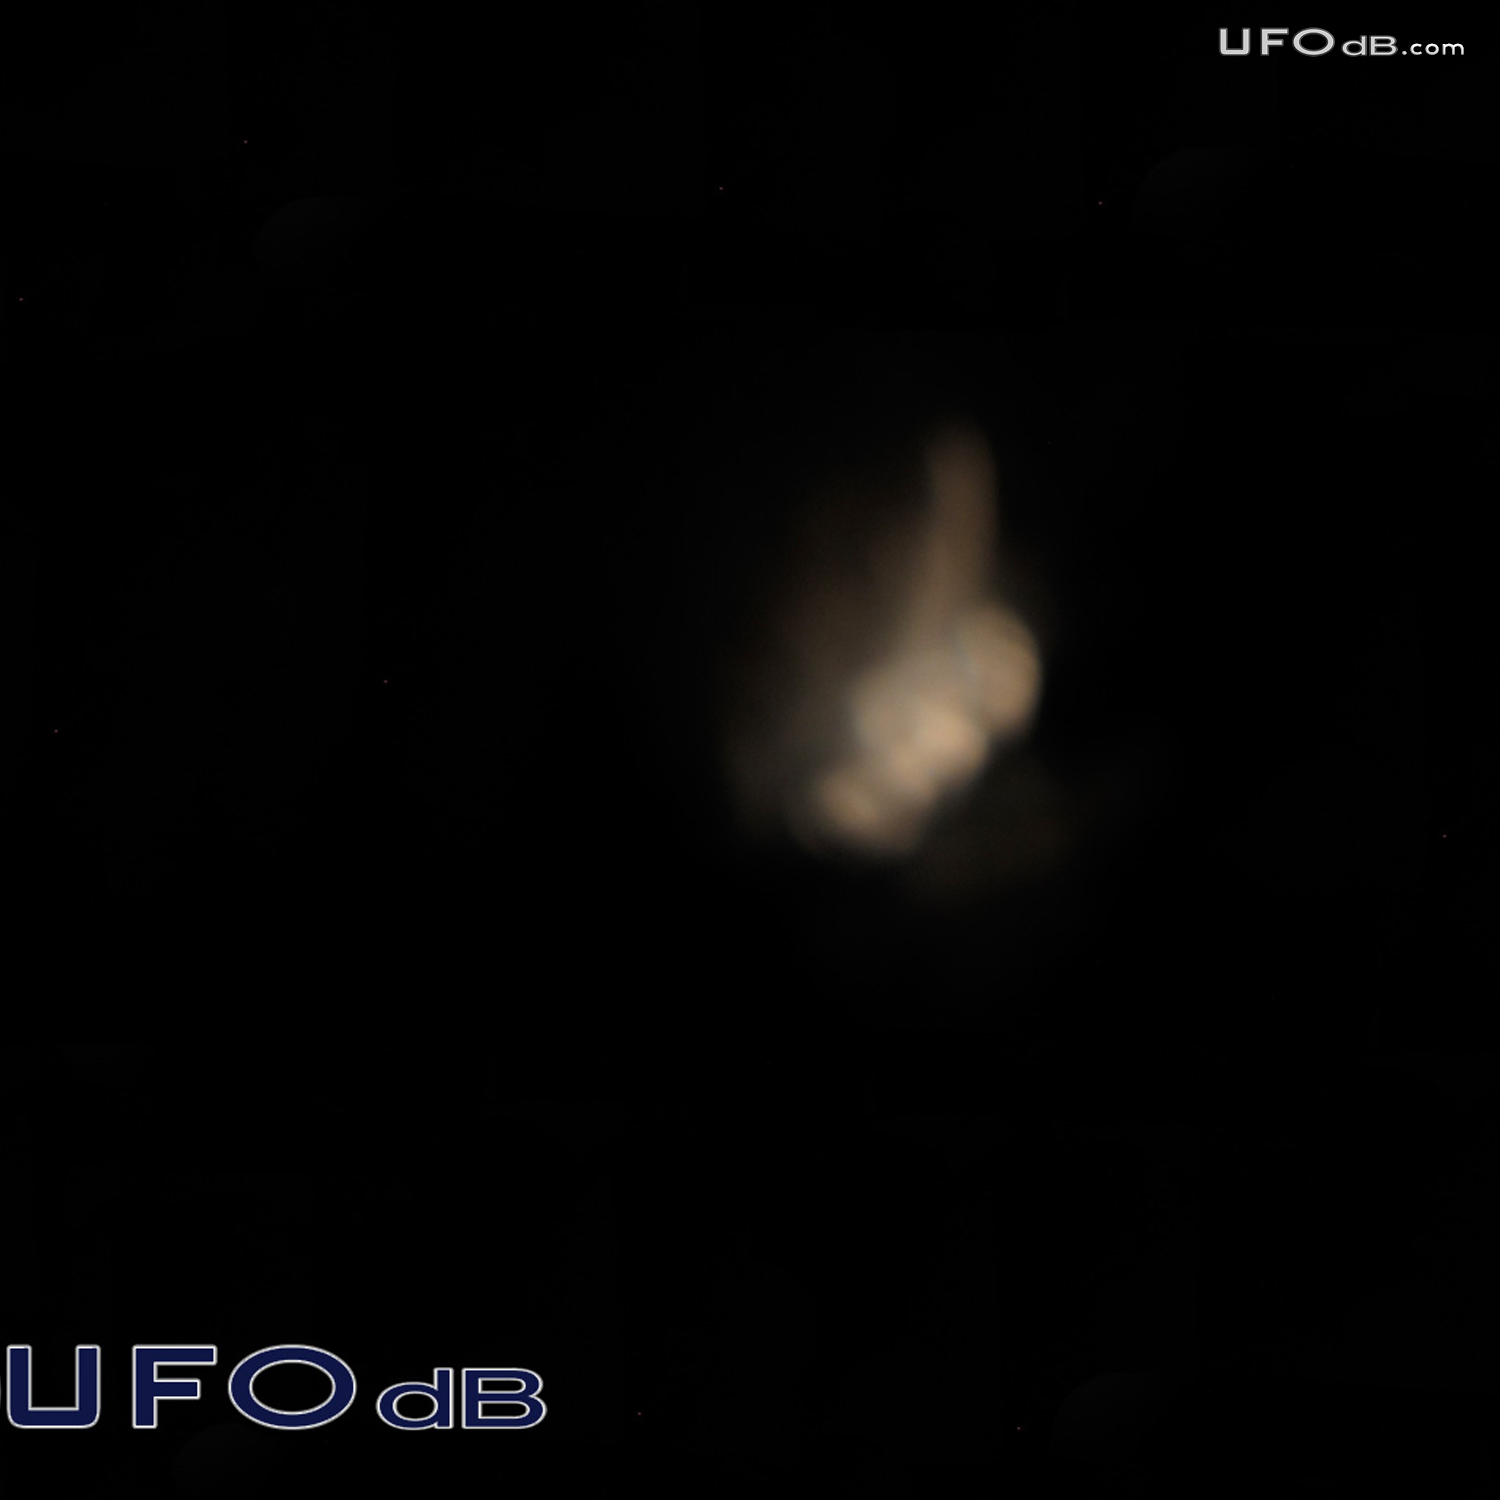 Pine Creek Campers see two UFOs on same night | Colorado | May 8 2011 UFO Picture #294-2